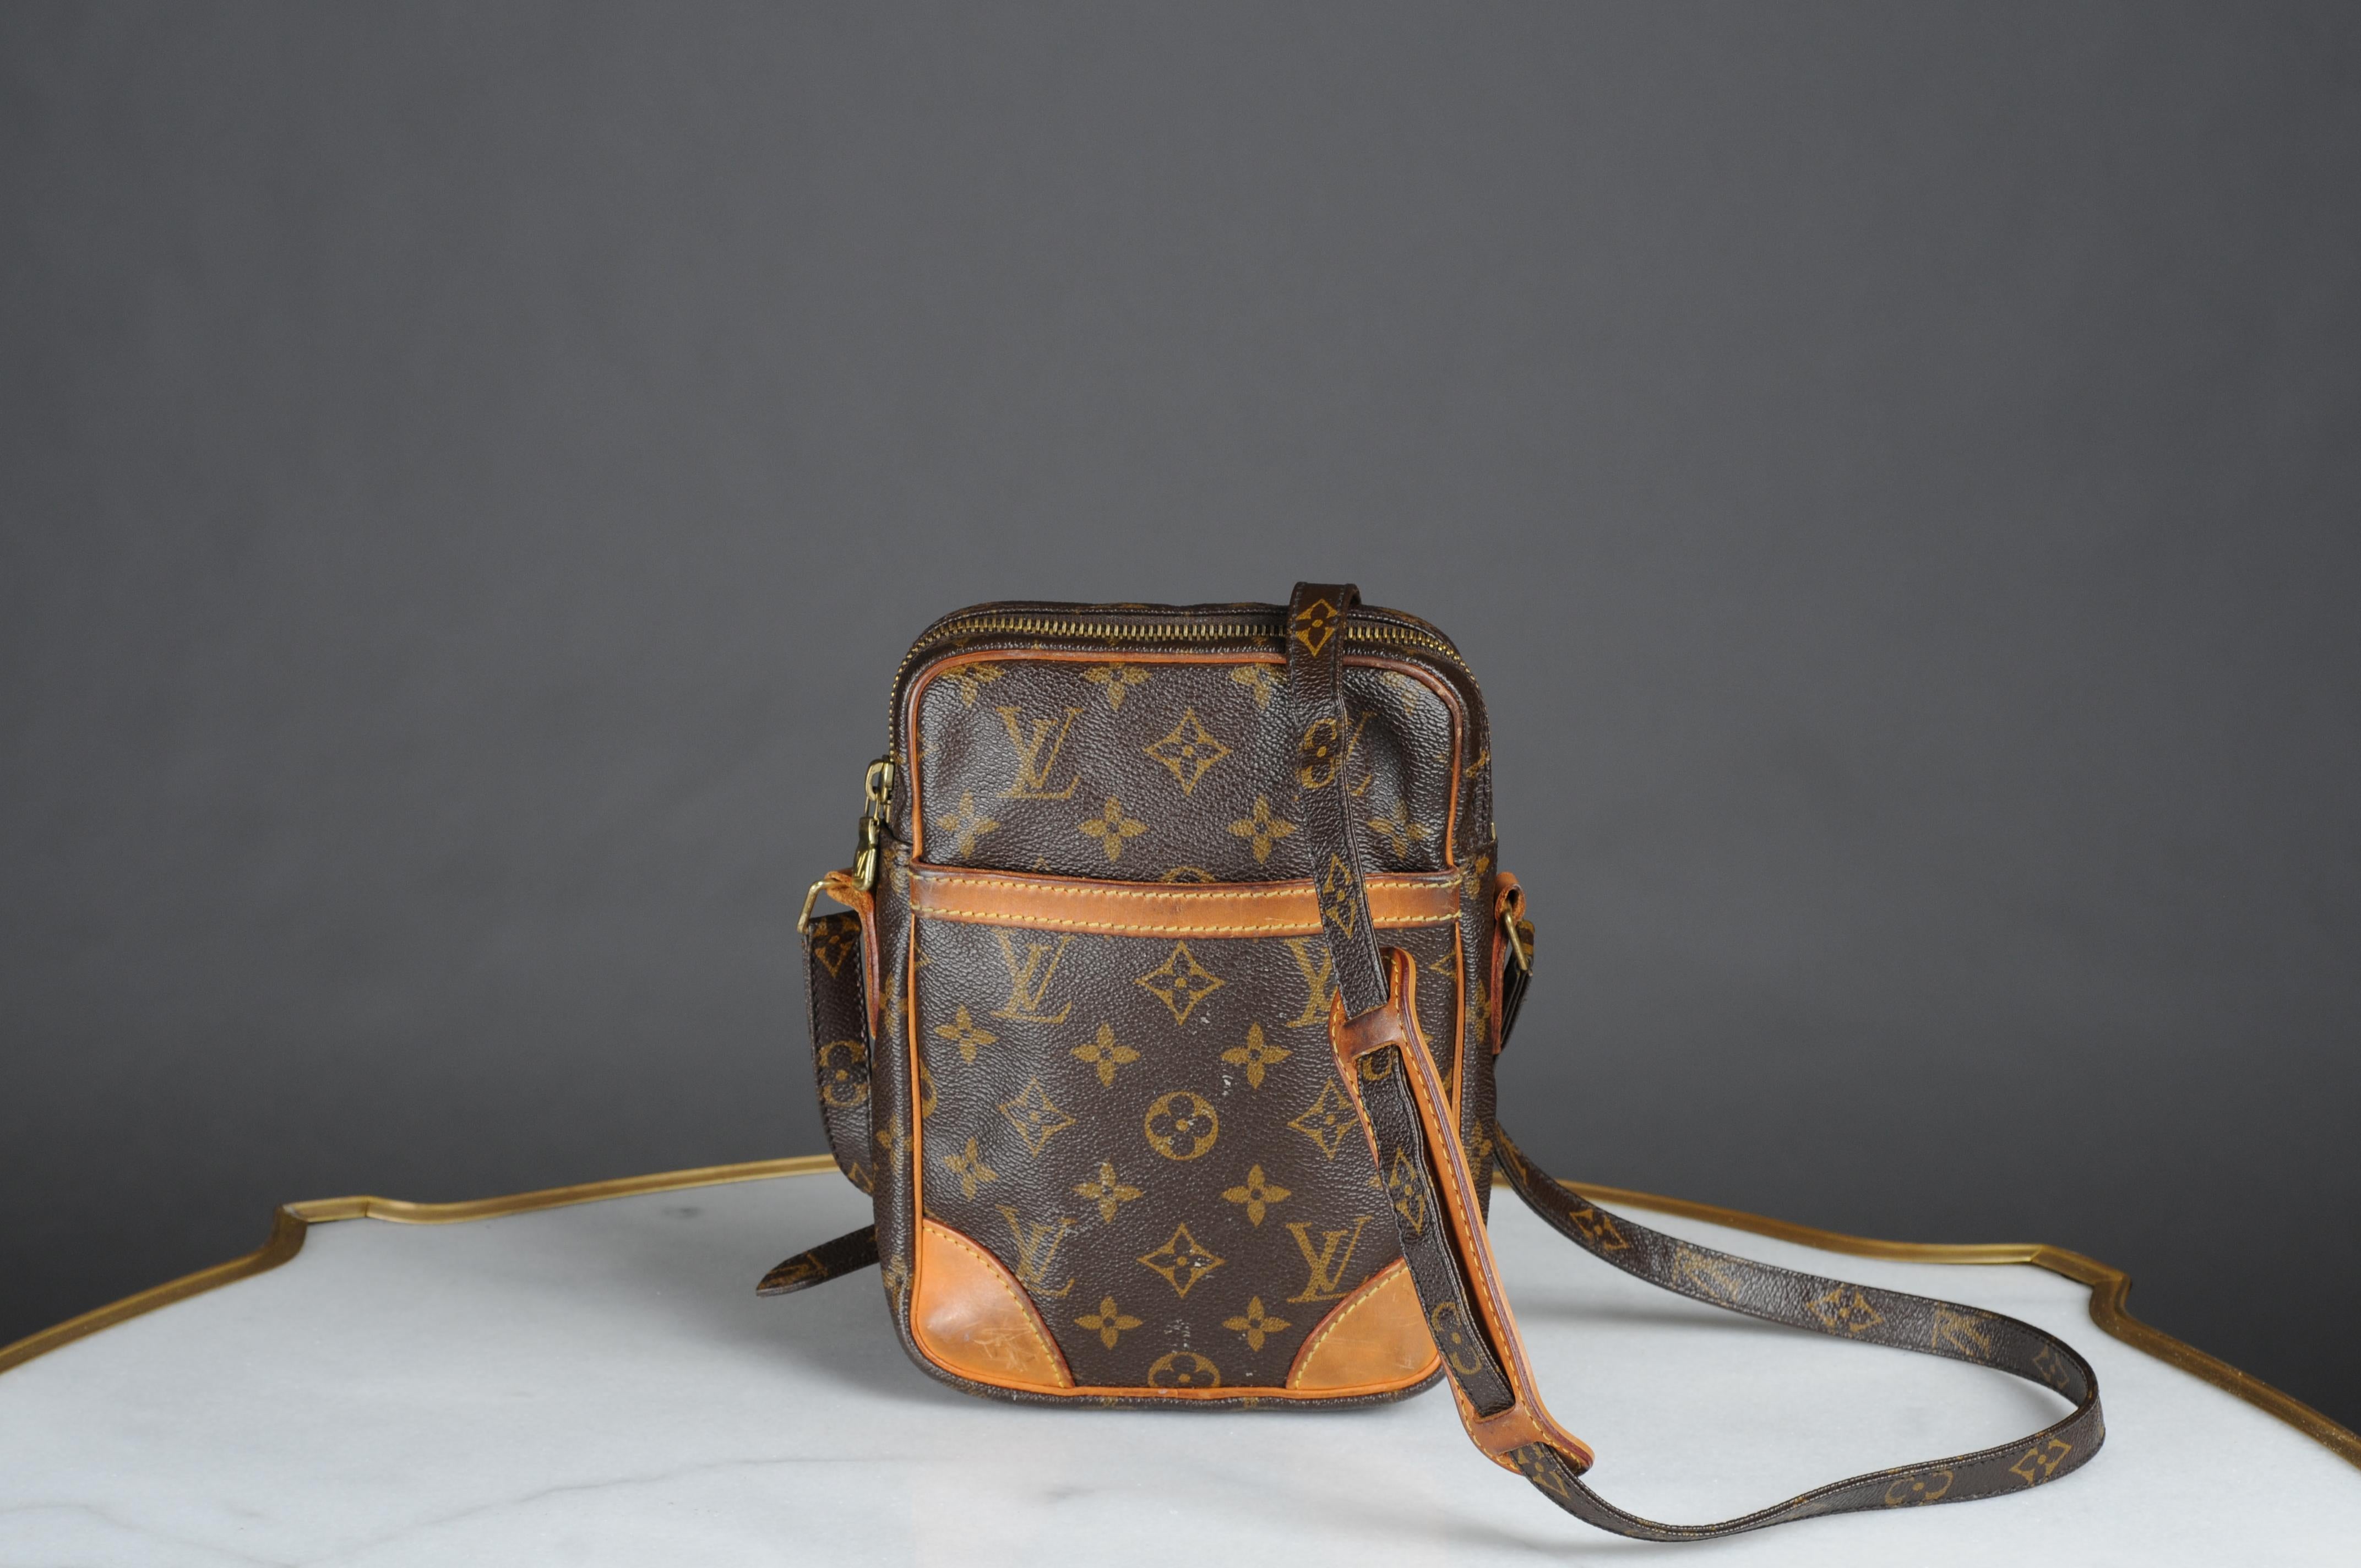 Authentic Louis Vuitton DANUBE monogram. The bag is in excellent condition, the interior of the bag is in excellent condition, all bags are in good and usable condition, light wear, light patina, very small marks and very heavy wear on the leather